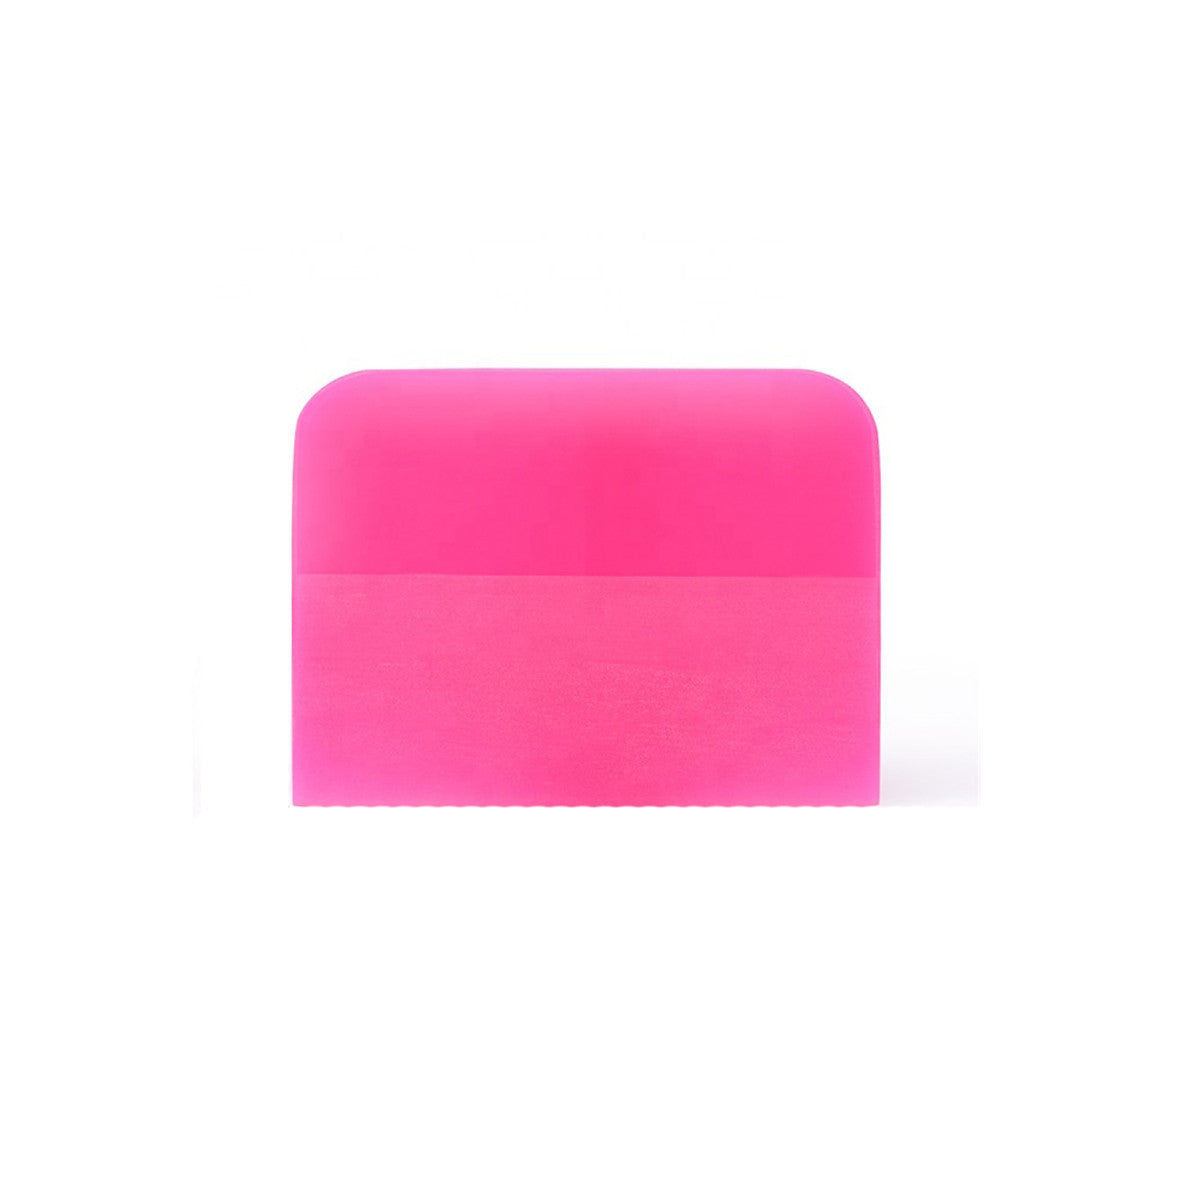  Pink Specialty Squeegee, window cleaning